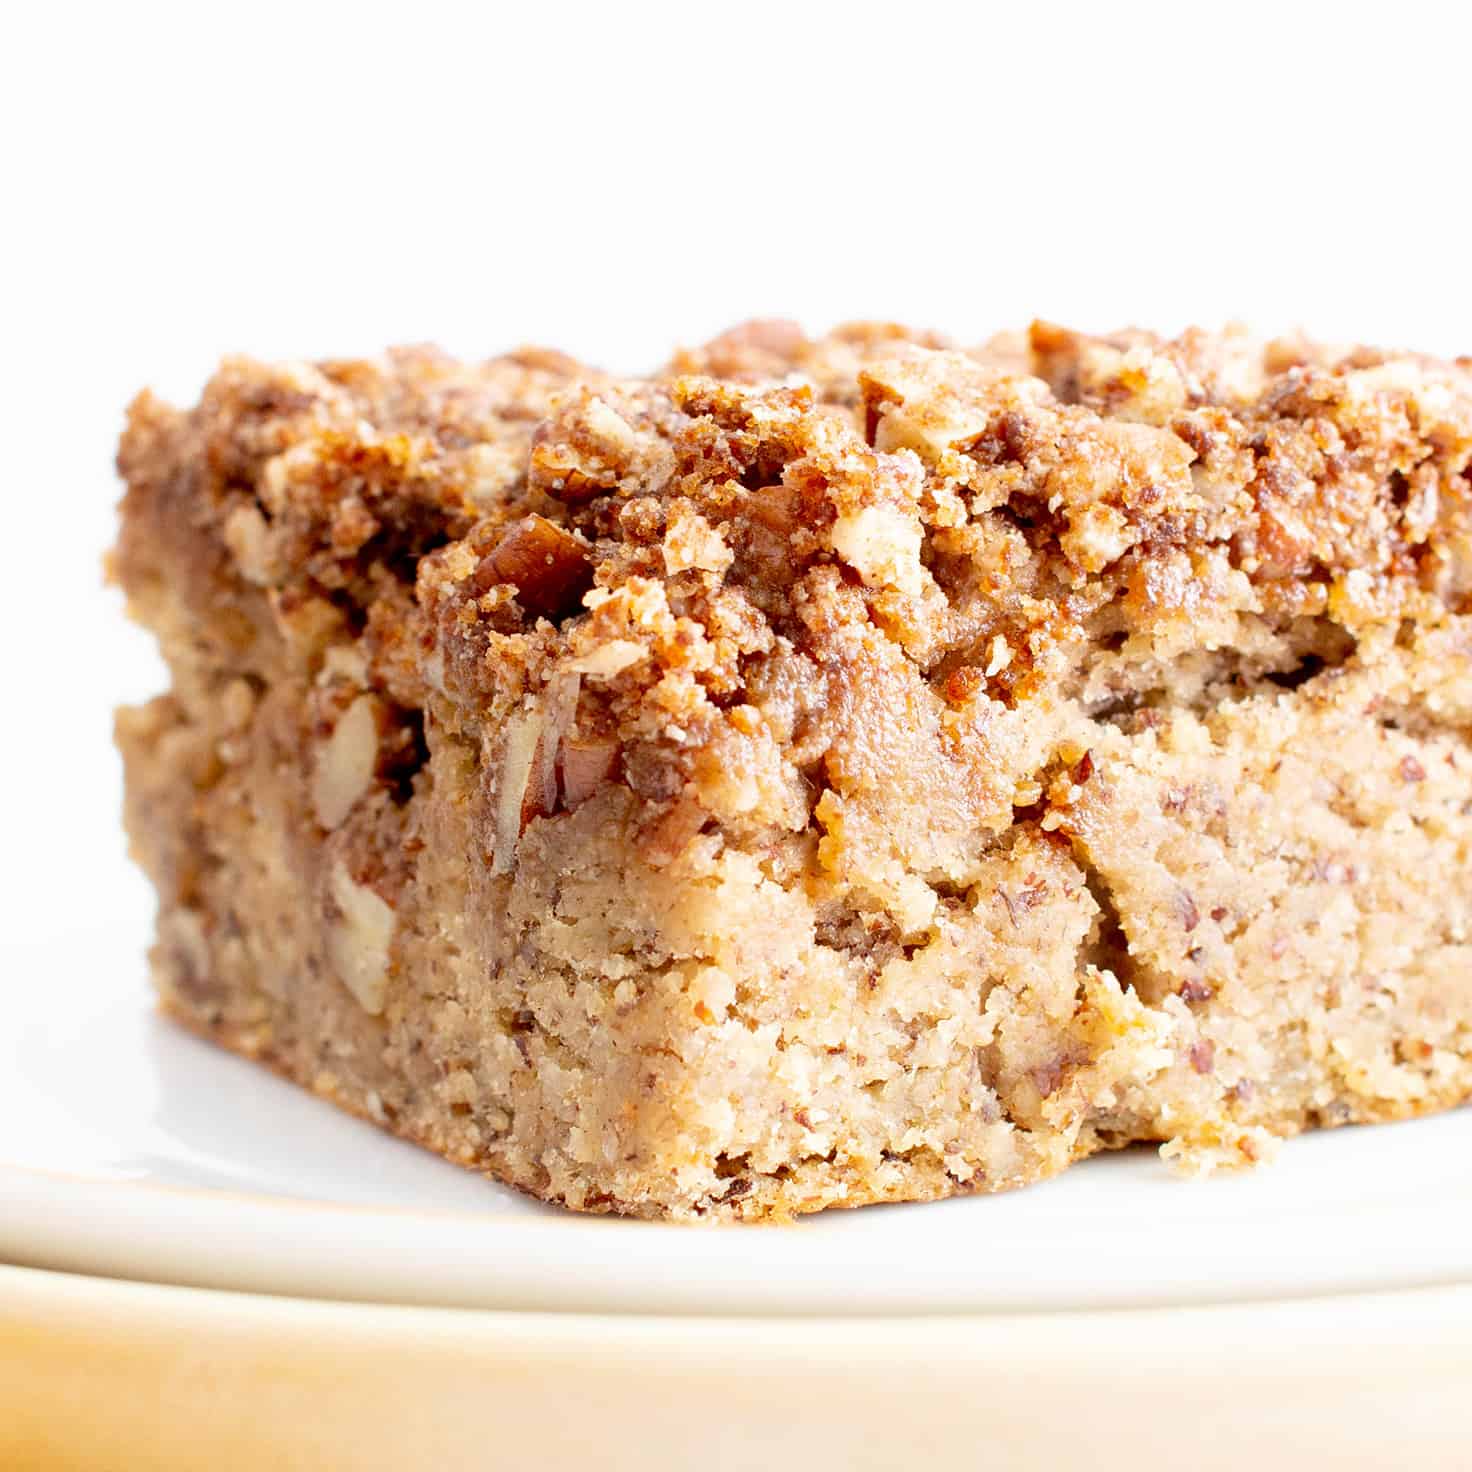 Vegan Gluten Free Banana Bread Coffee Cake Recipe (Easy, Healthy) – with Streusel Topping